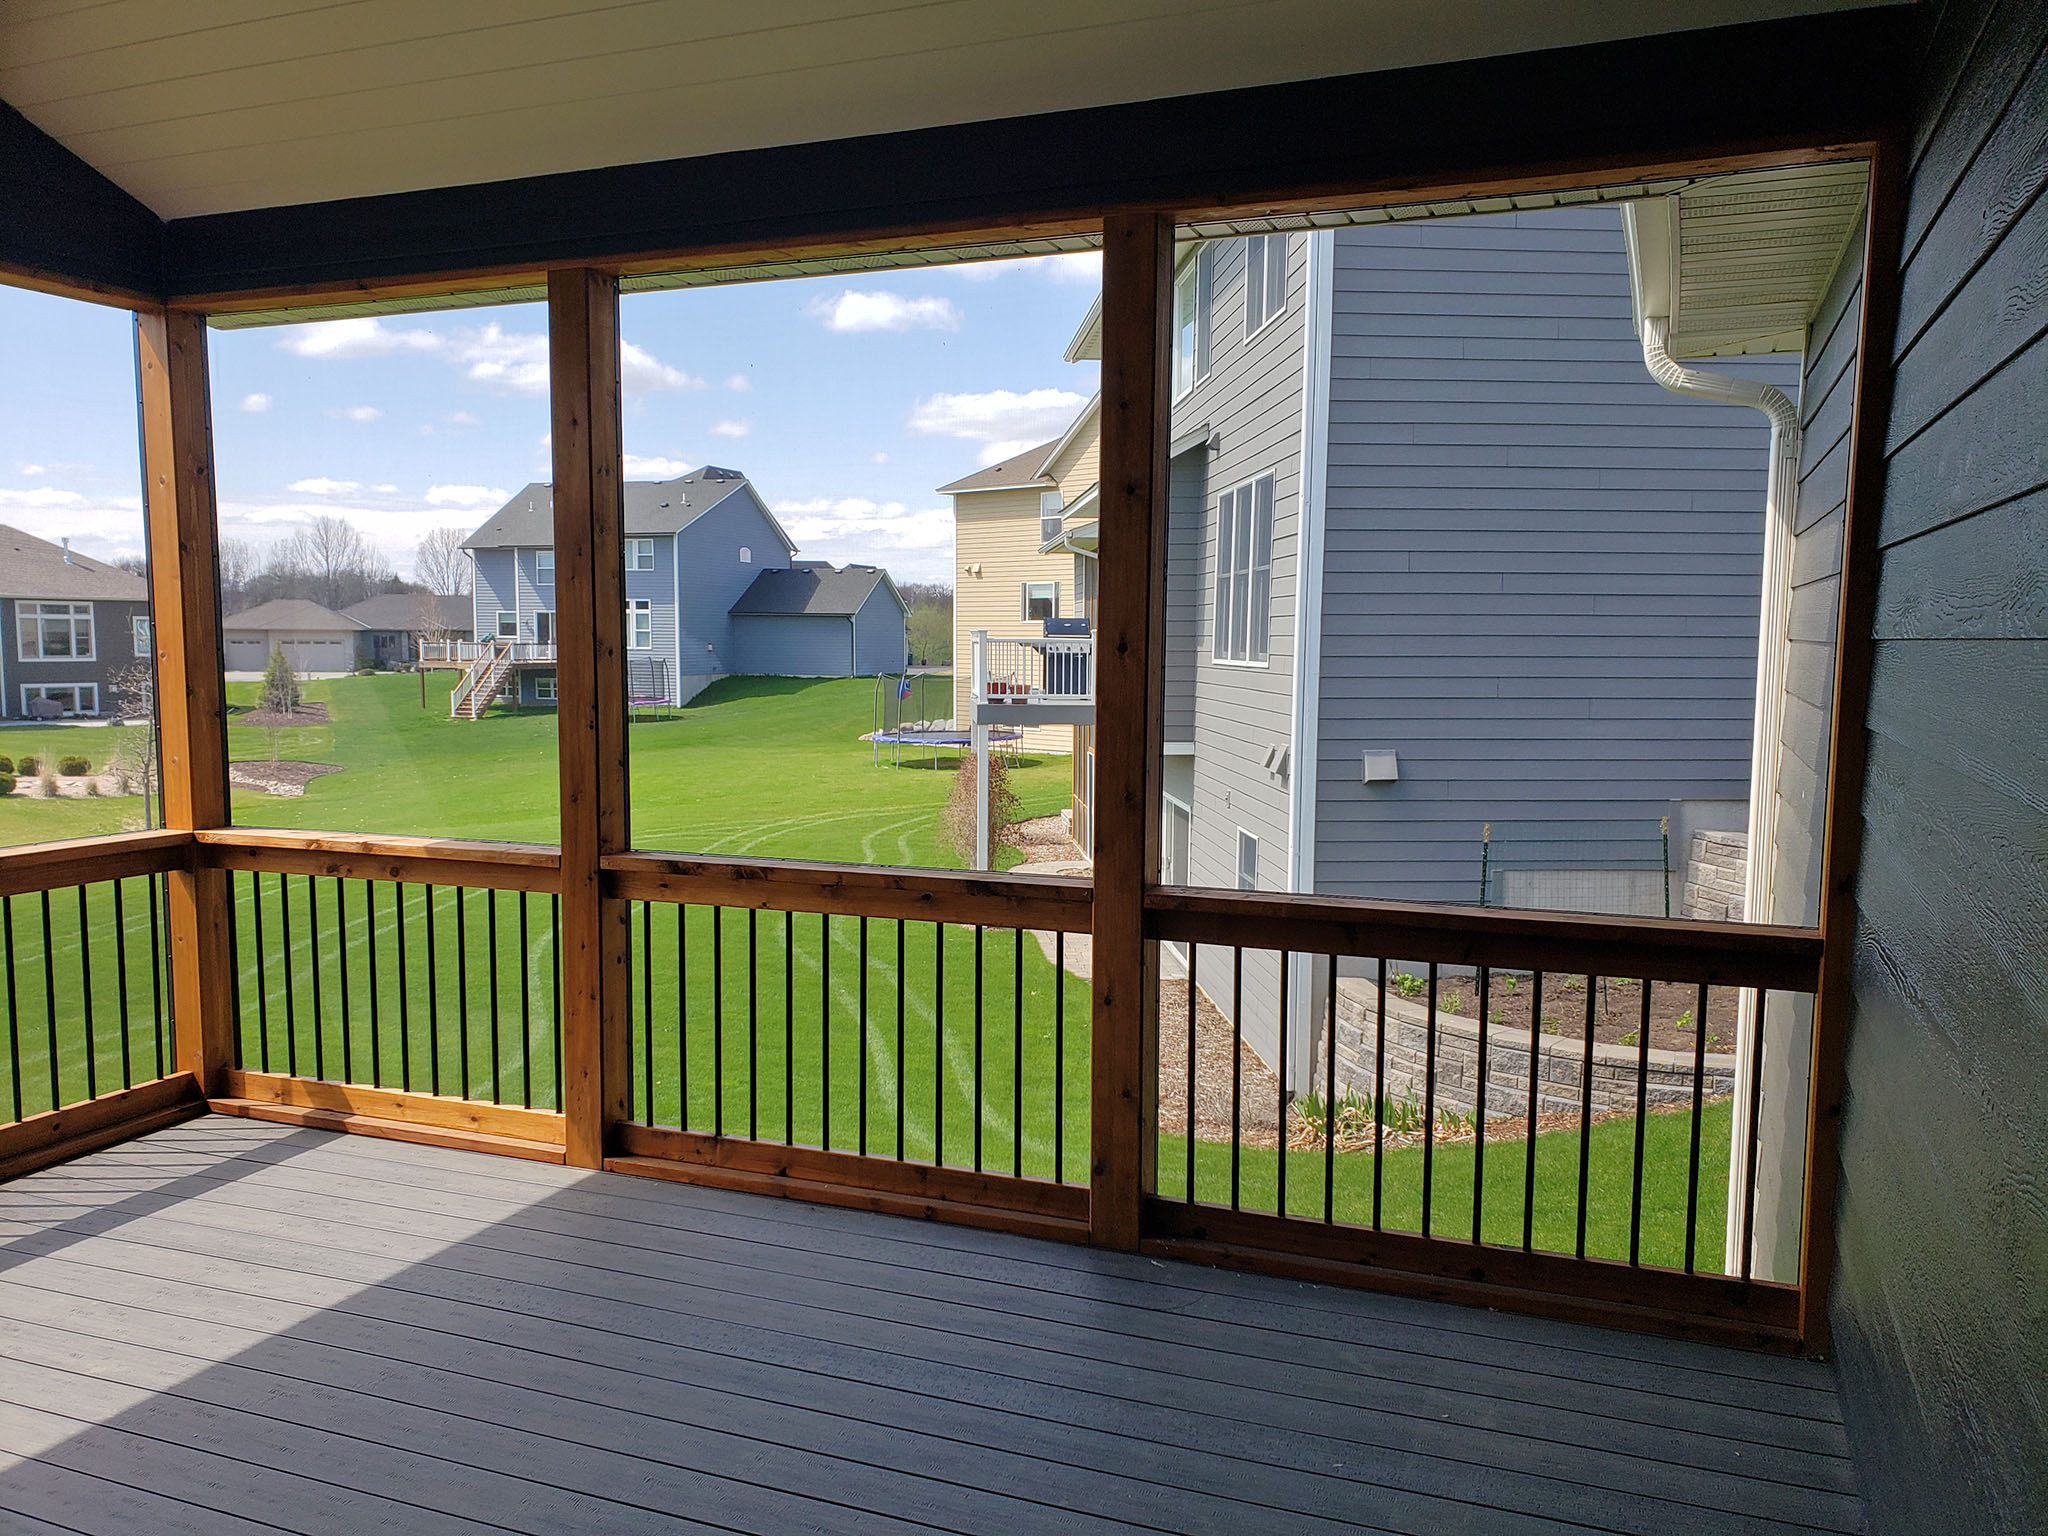 Screen porch with TimberTech composite decking with metal balusters and railing